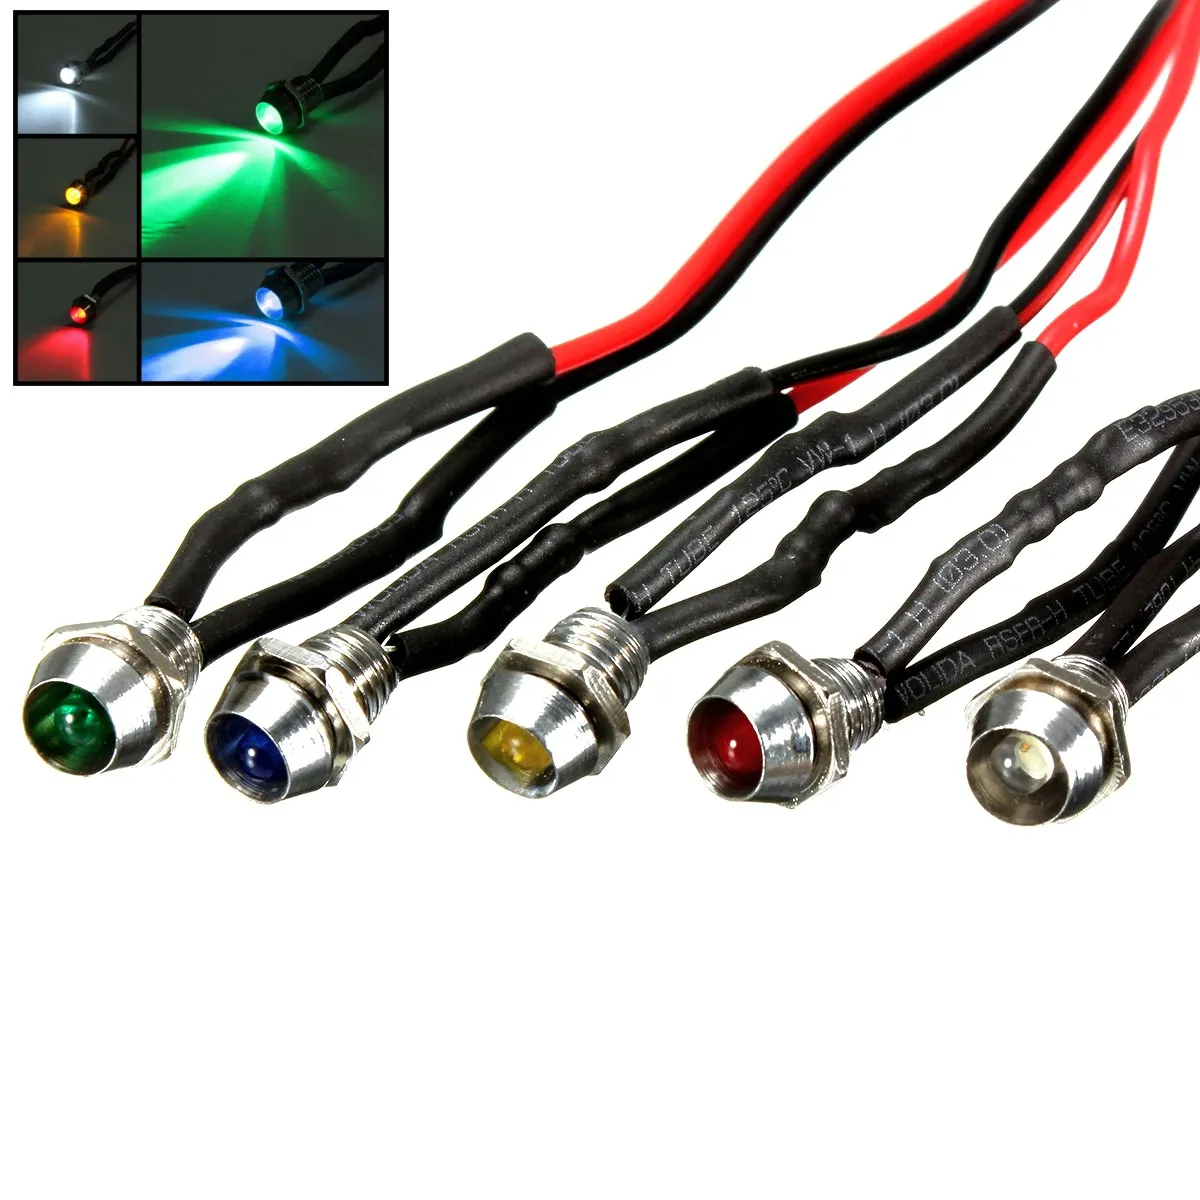 ZN 5 LED Indicator Light Lamp Pilot Dash Directional Car Vehicle Motorcycle Boat Truck,Colours 